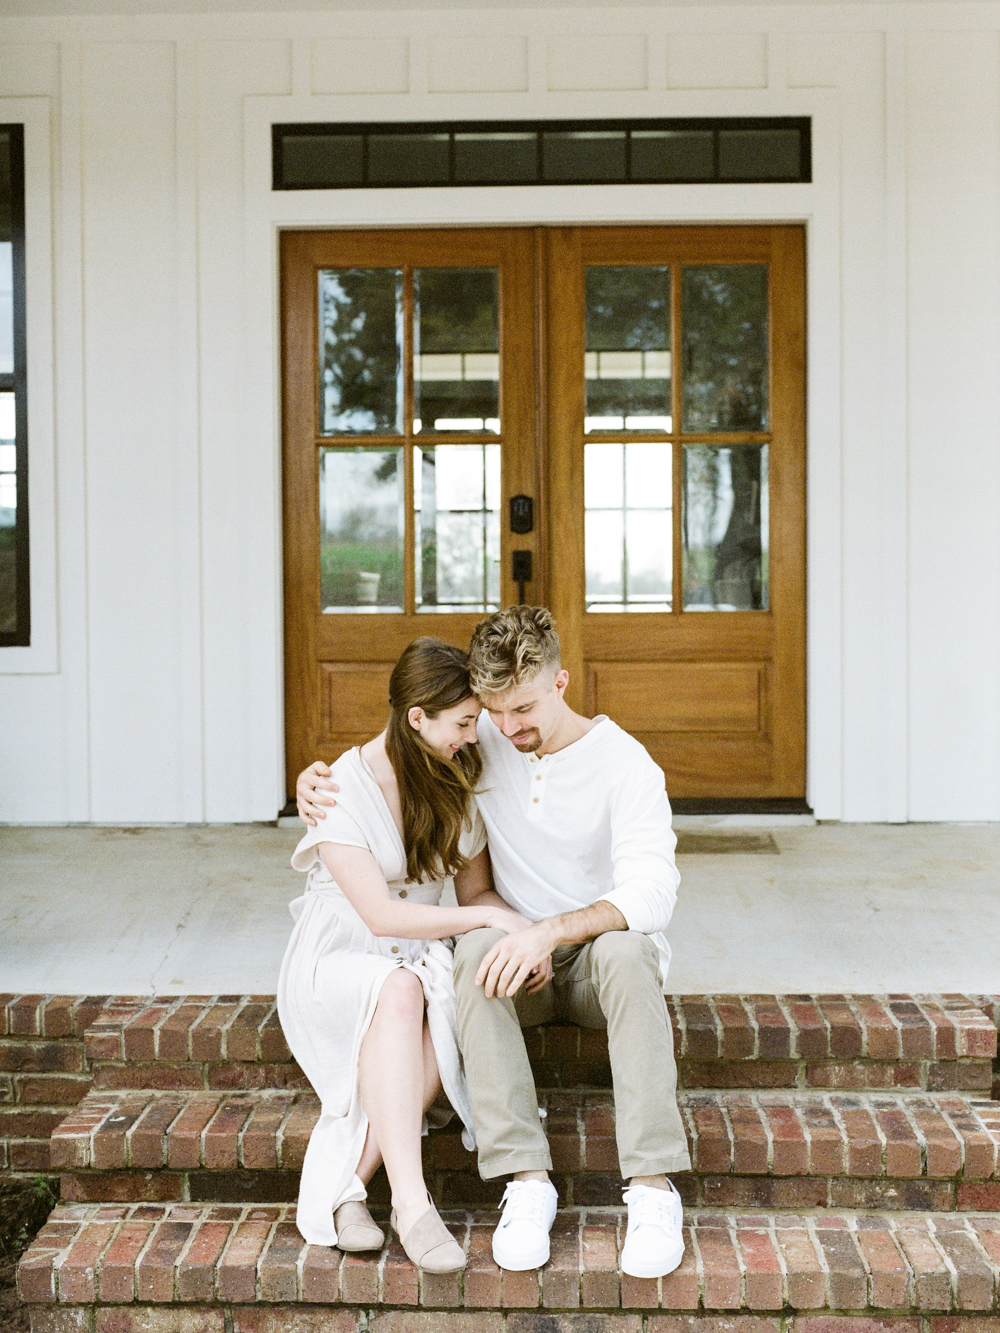 at home engagement session - Christine Gosch - featured on Magnolia Rouge - film photographer - elopement and intimate wedding photographer-21.jpg